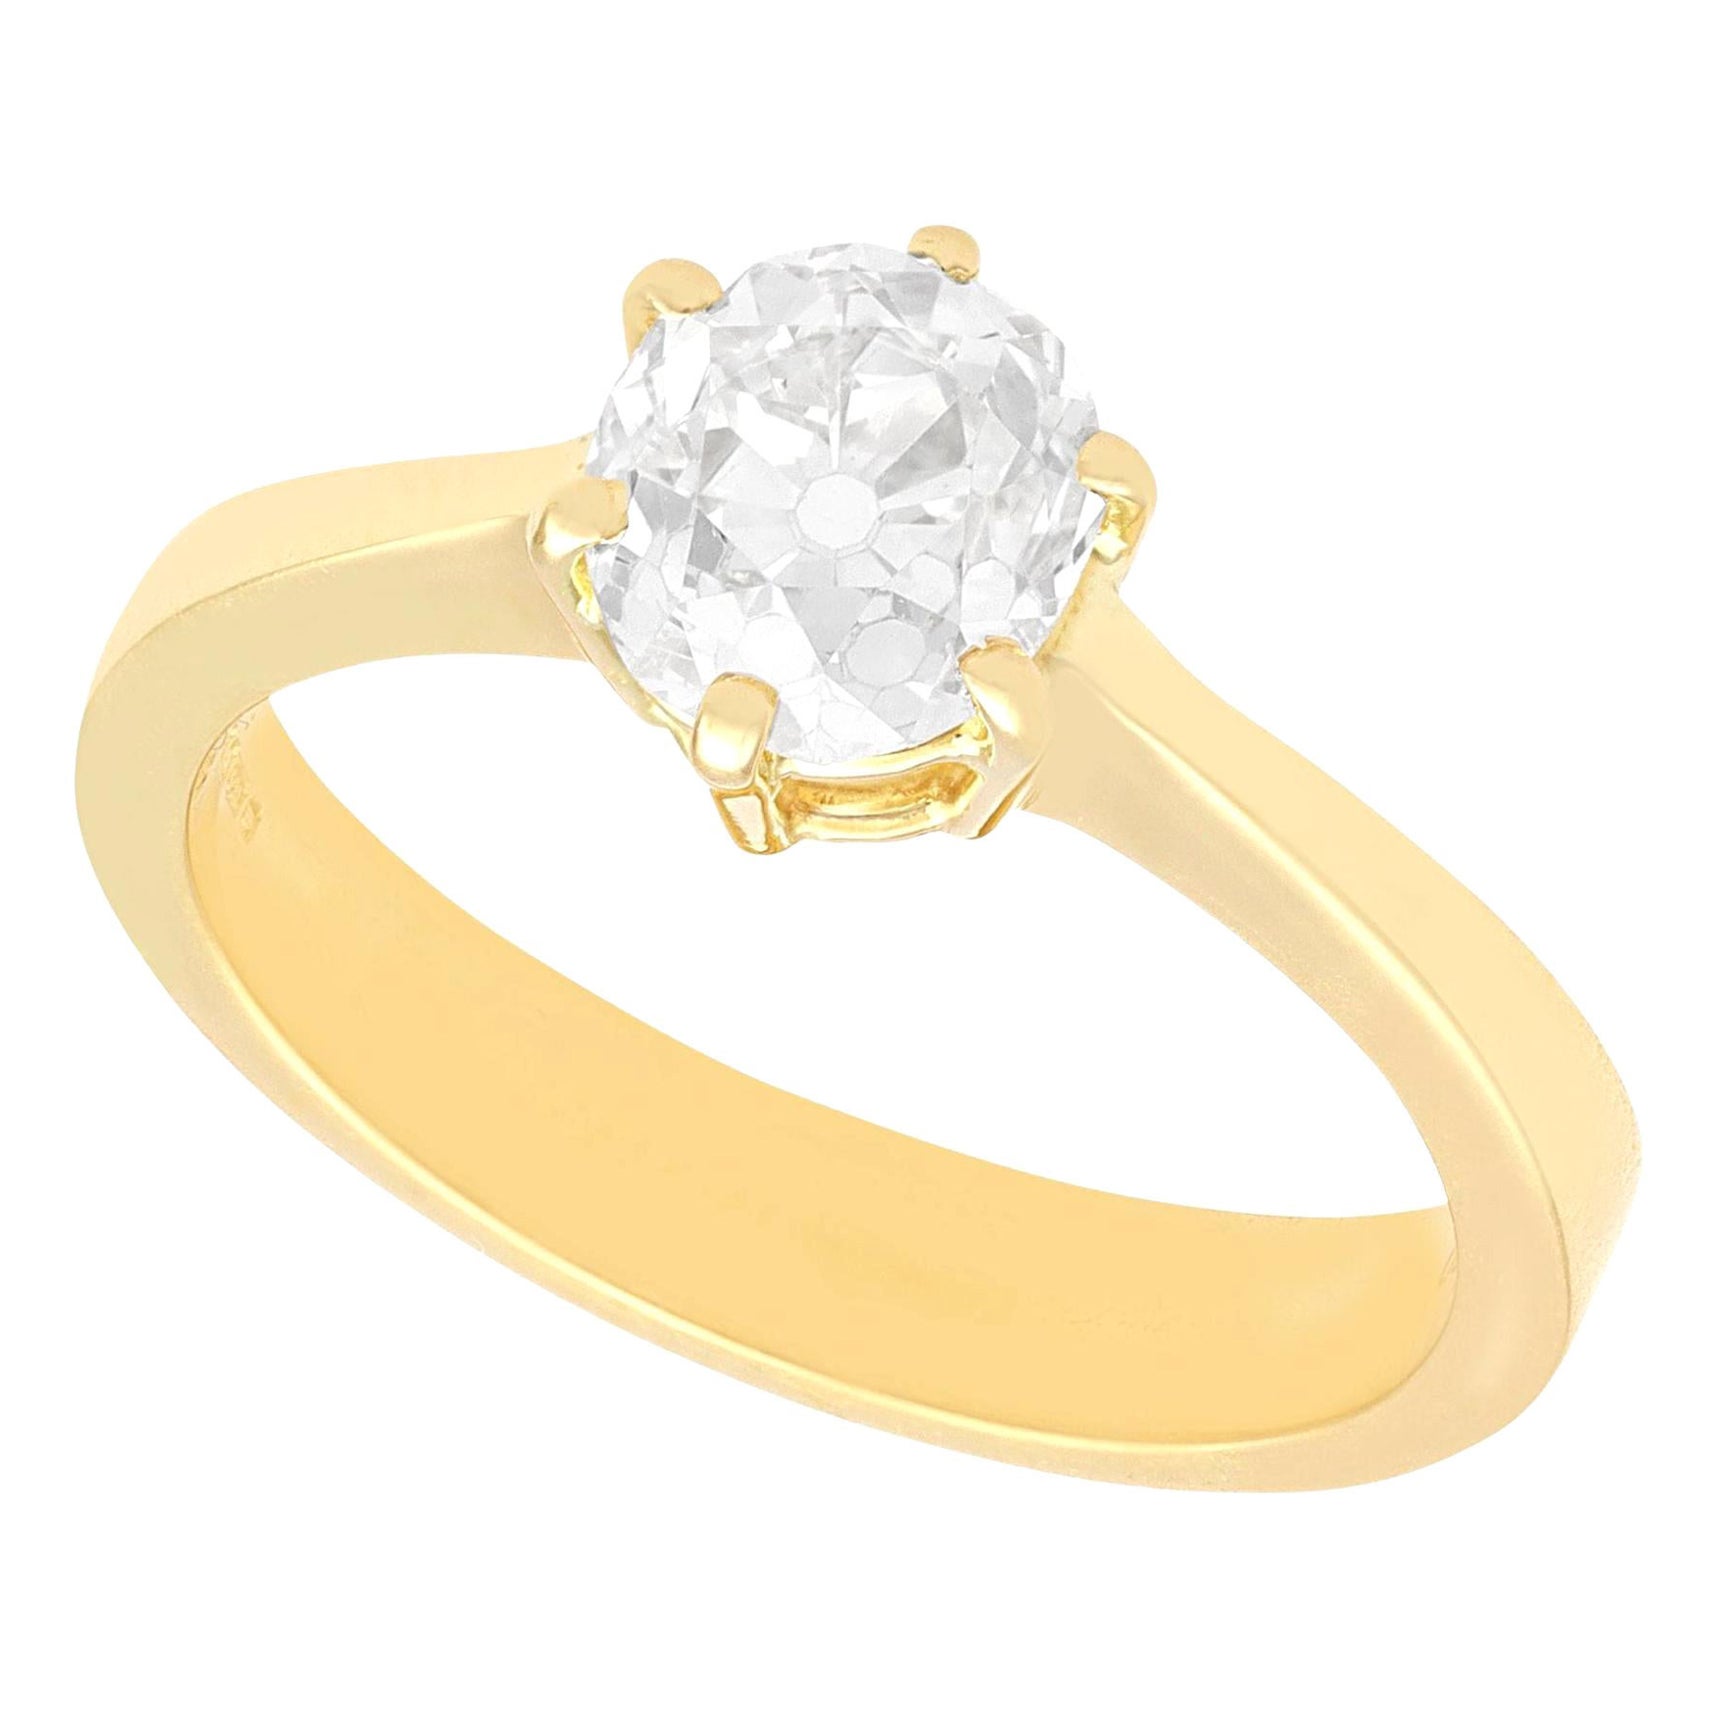 1.38 Carat Diamond 18k Yellow Gold Solitaire Engagement Ring For Sale